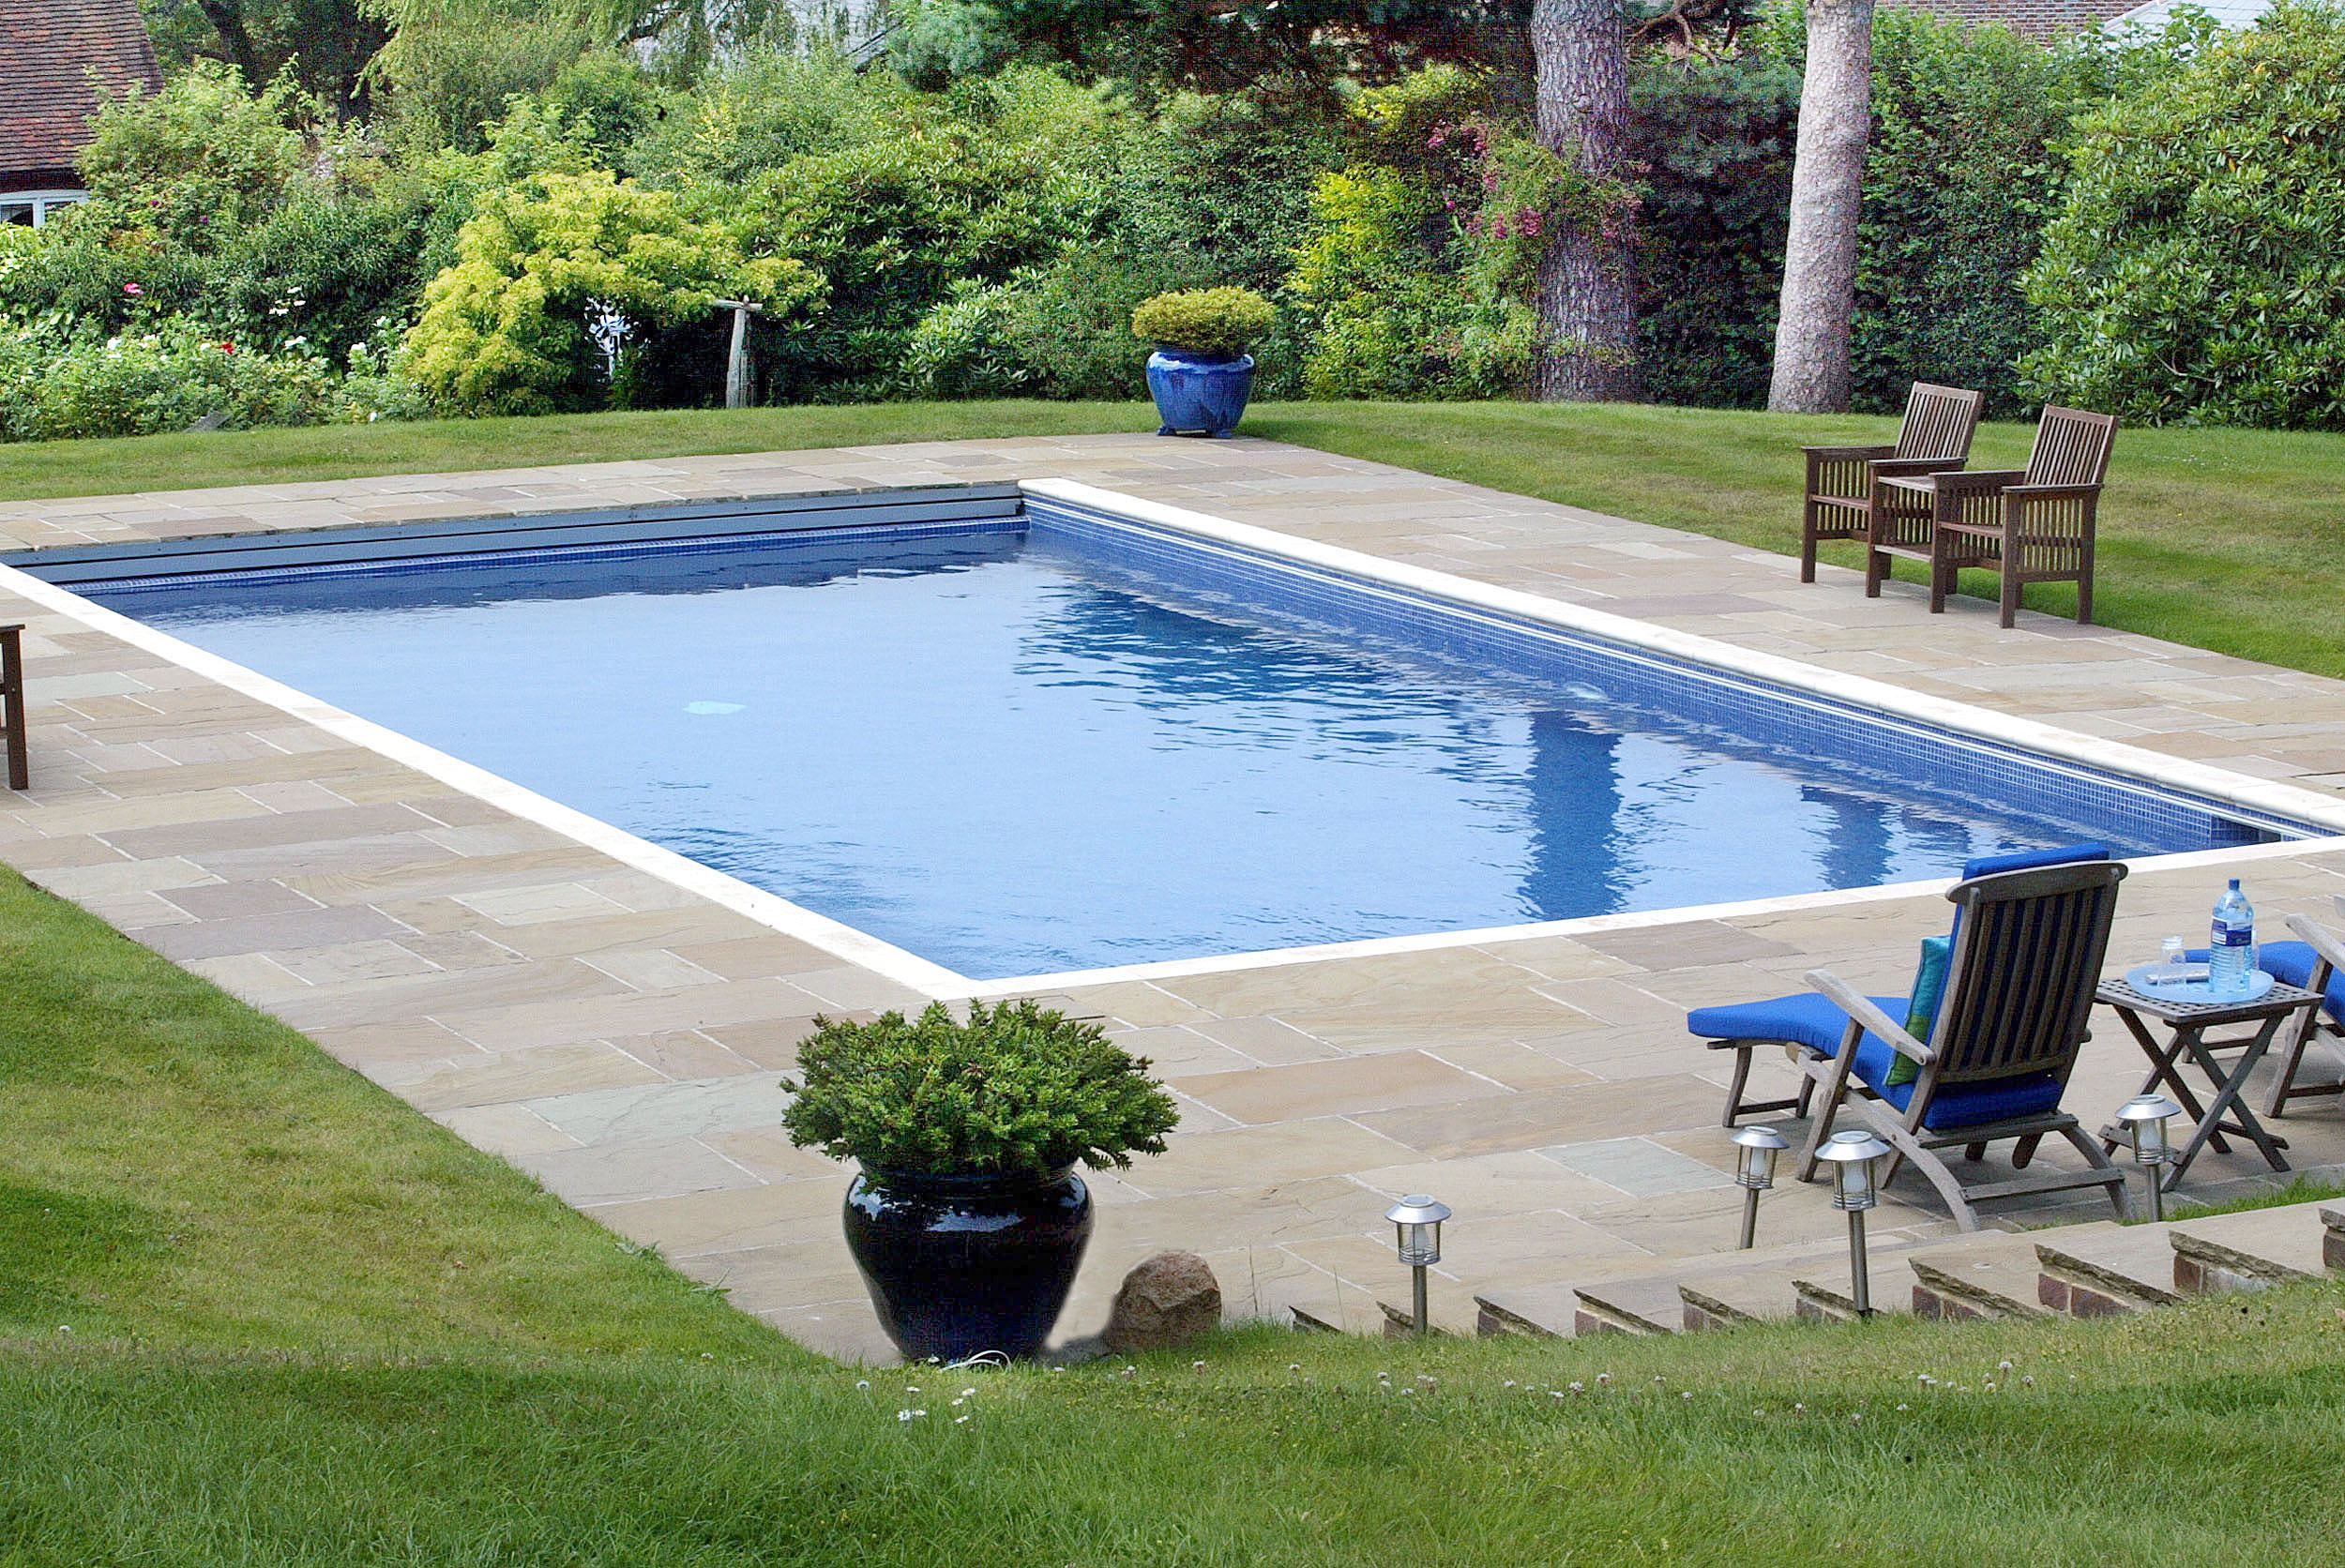 Sussex swimming pool experts put fitness and fun into gardens.